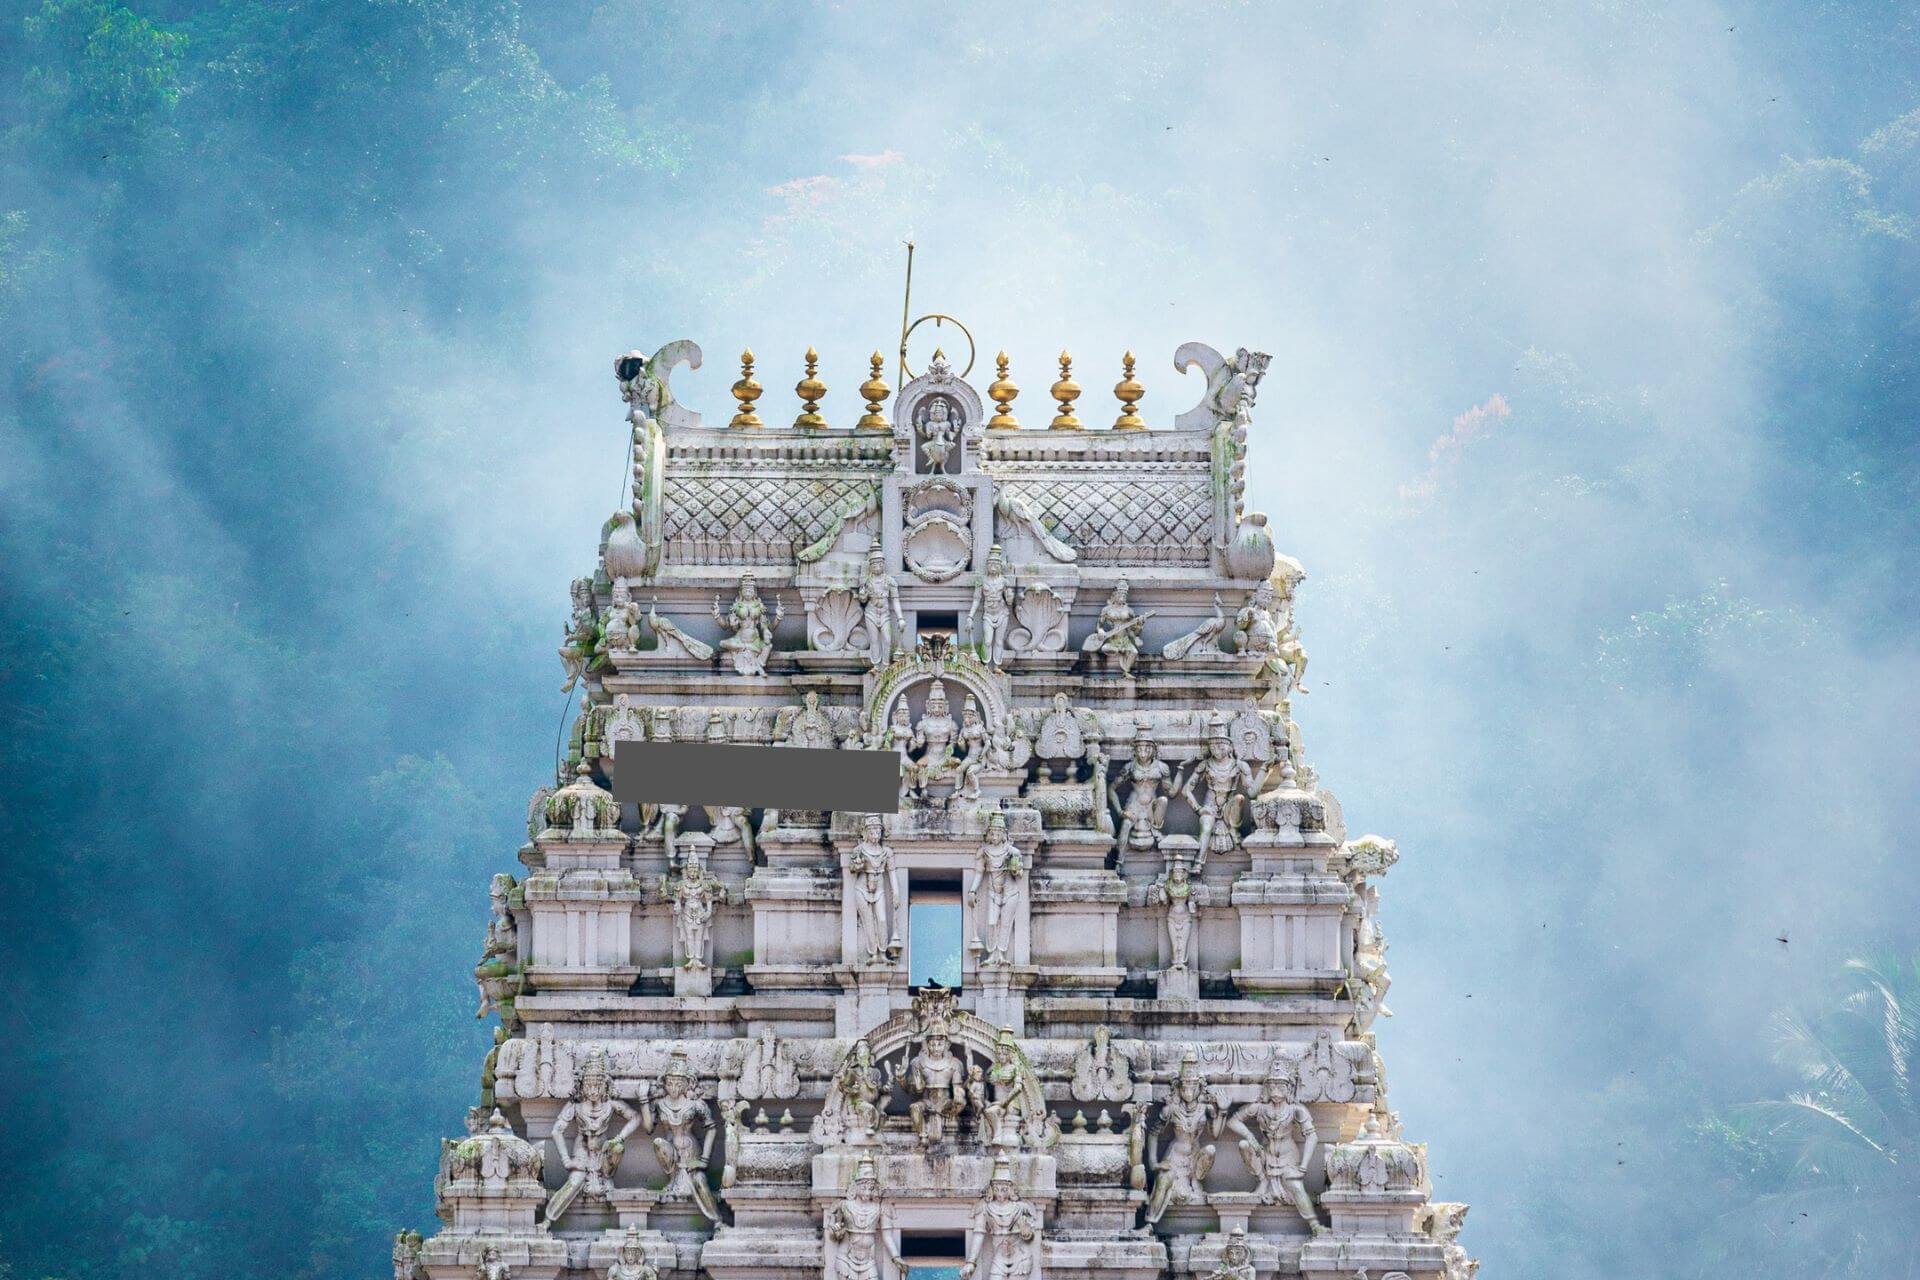 Temples in South India